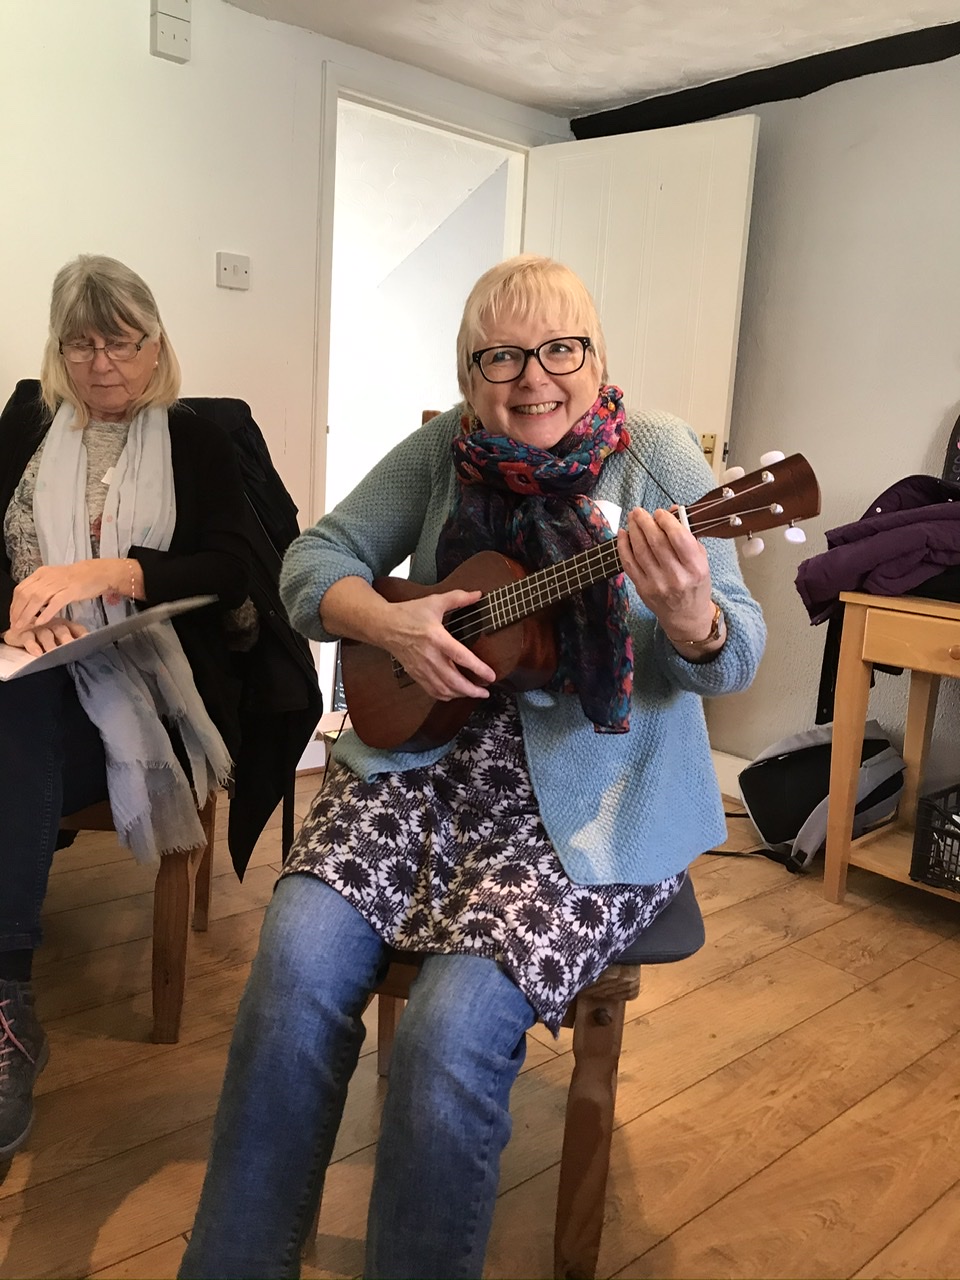 A photo from one of the taster workshops. For this workshop, the group were trying singing with singing teacher, Sally Rose. In this photo Sally is grinning while sat on a chair with a little guitar.